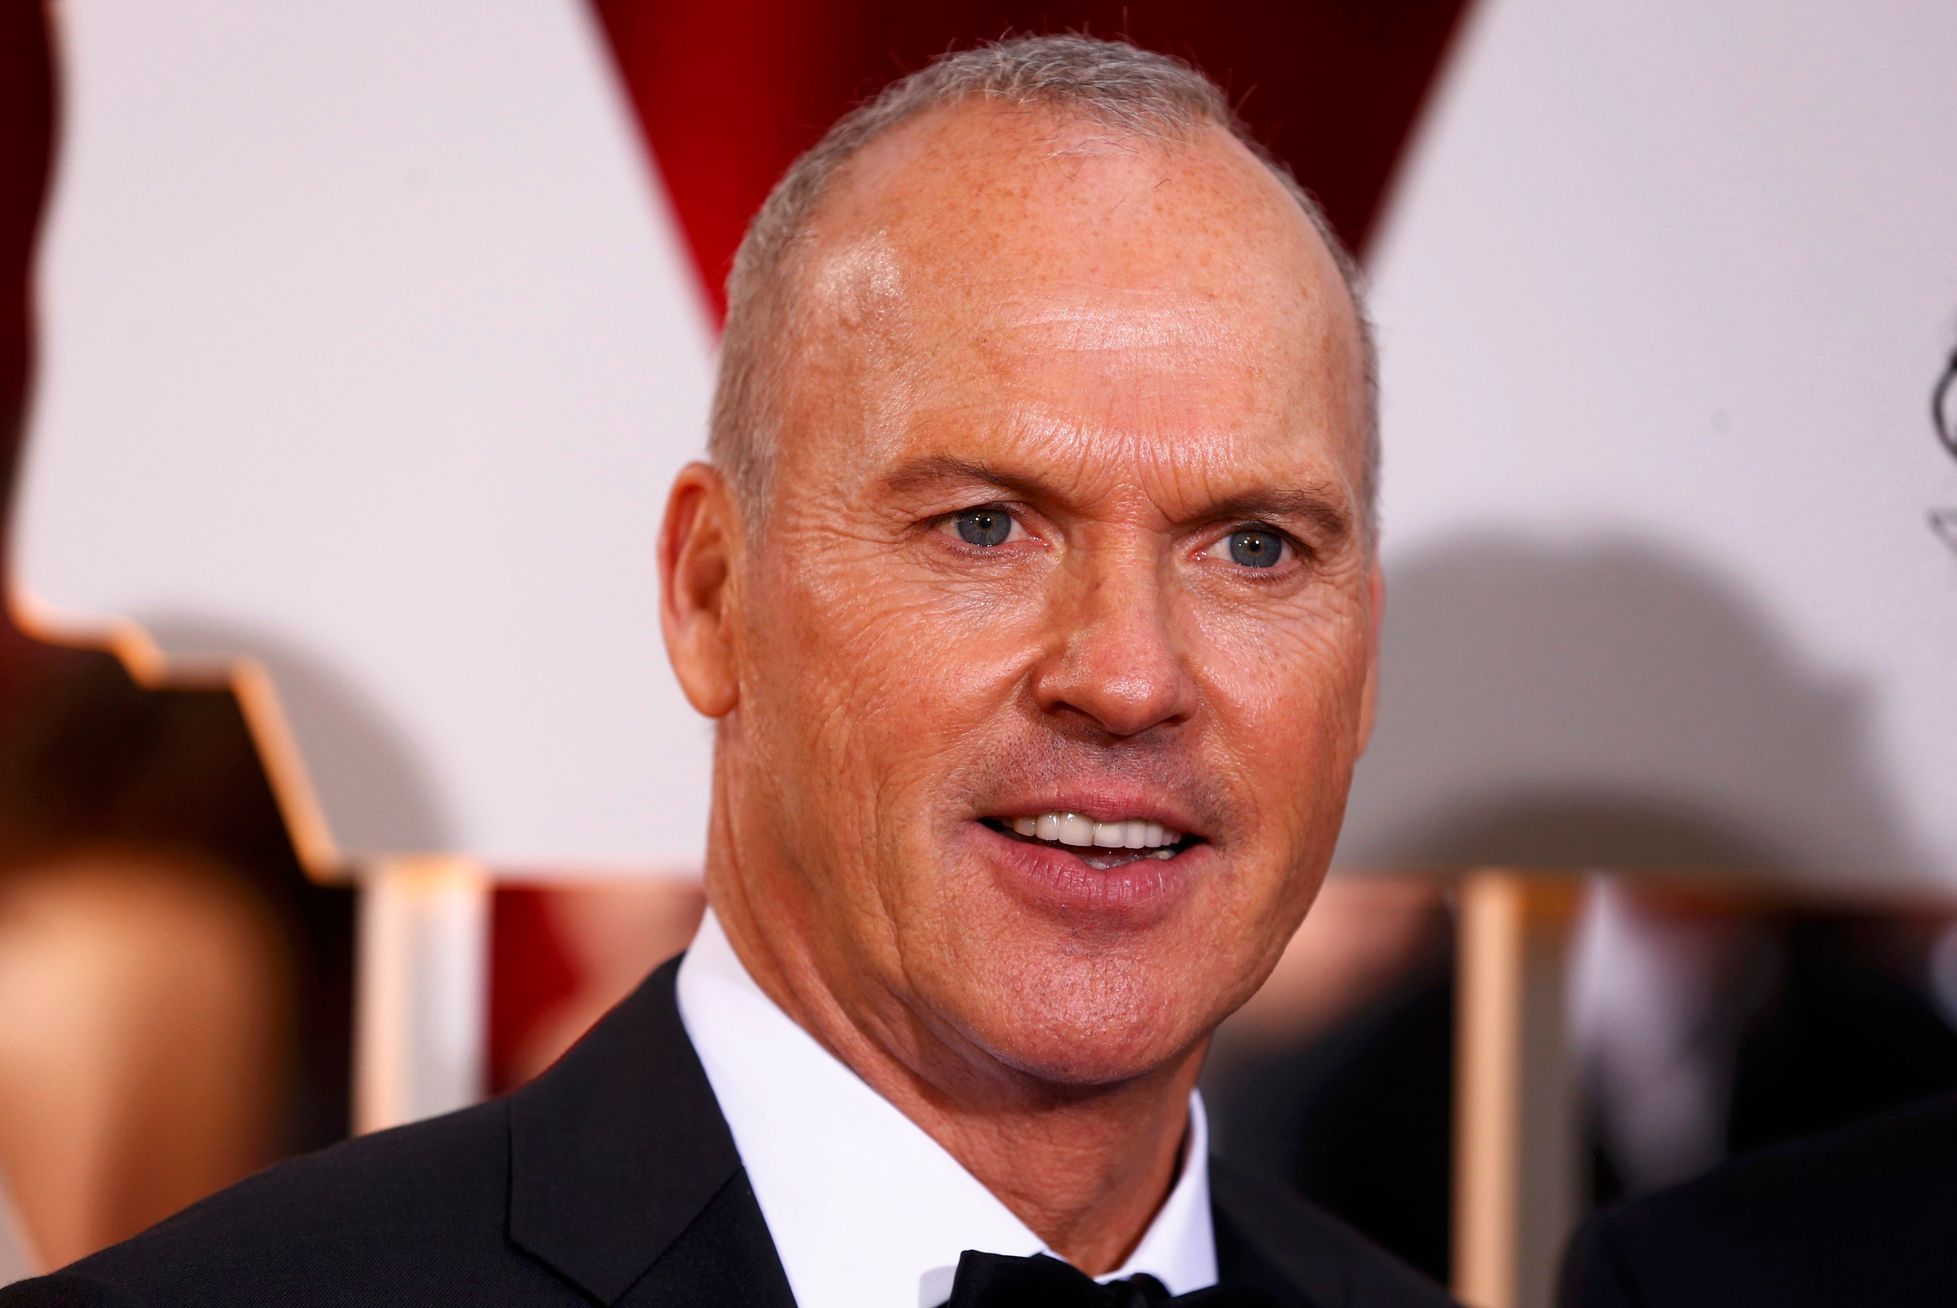 Michael Keaton, nominated for Best Actor for the film &quot;Birdman&quot; arrives at the 87th Academy Awards in Hollywood